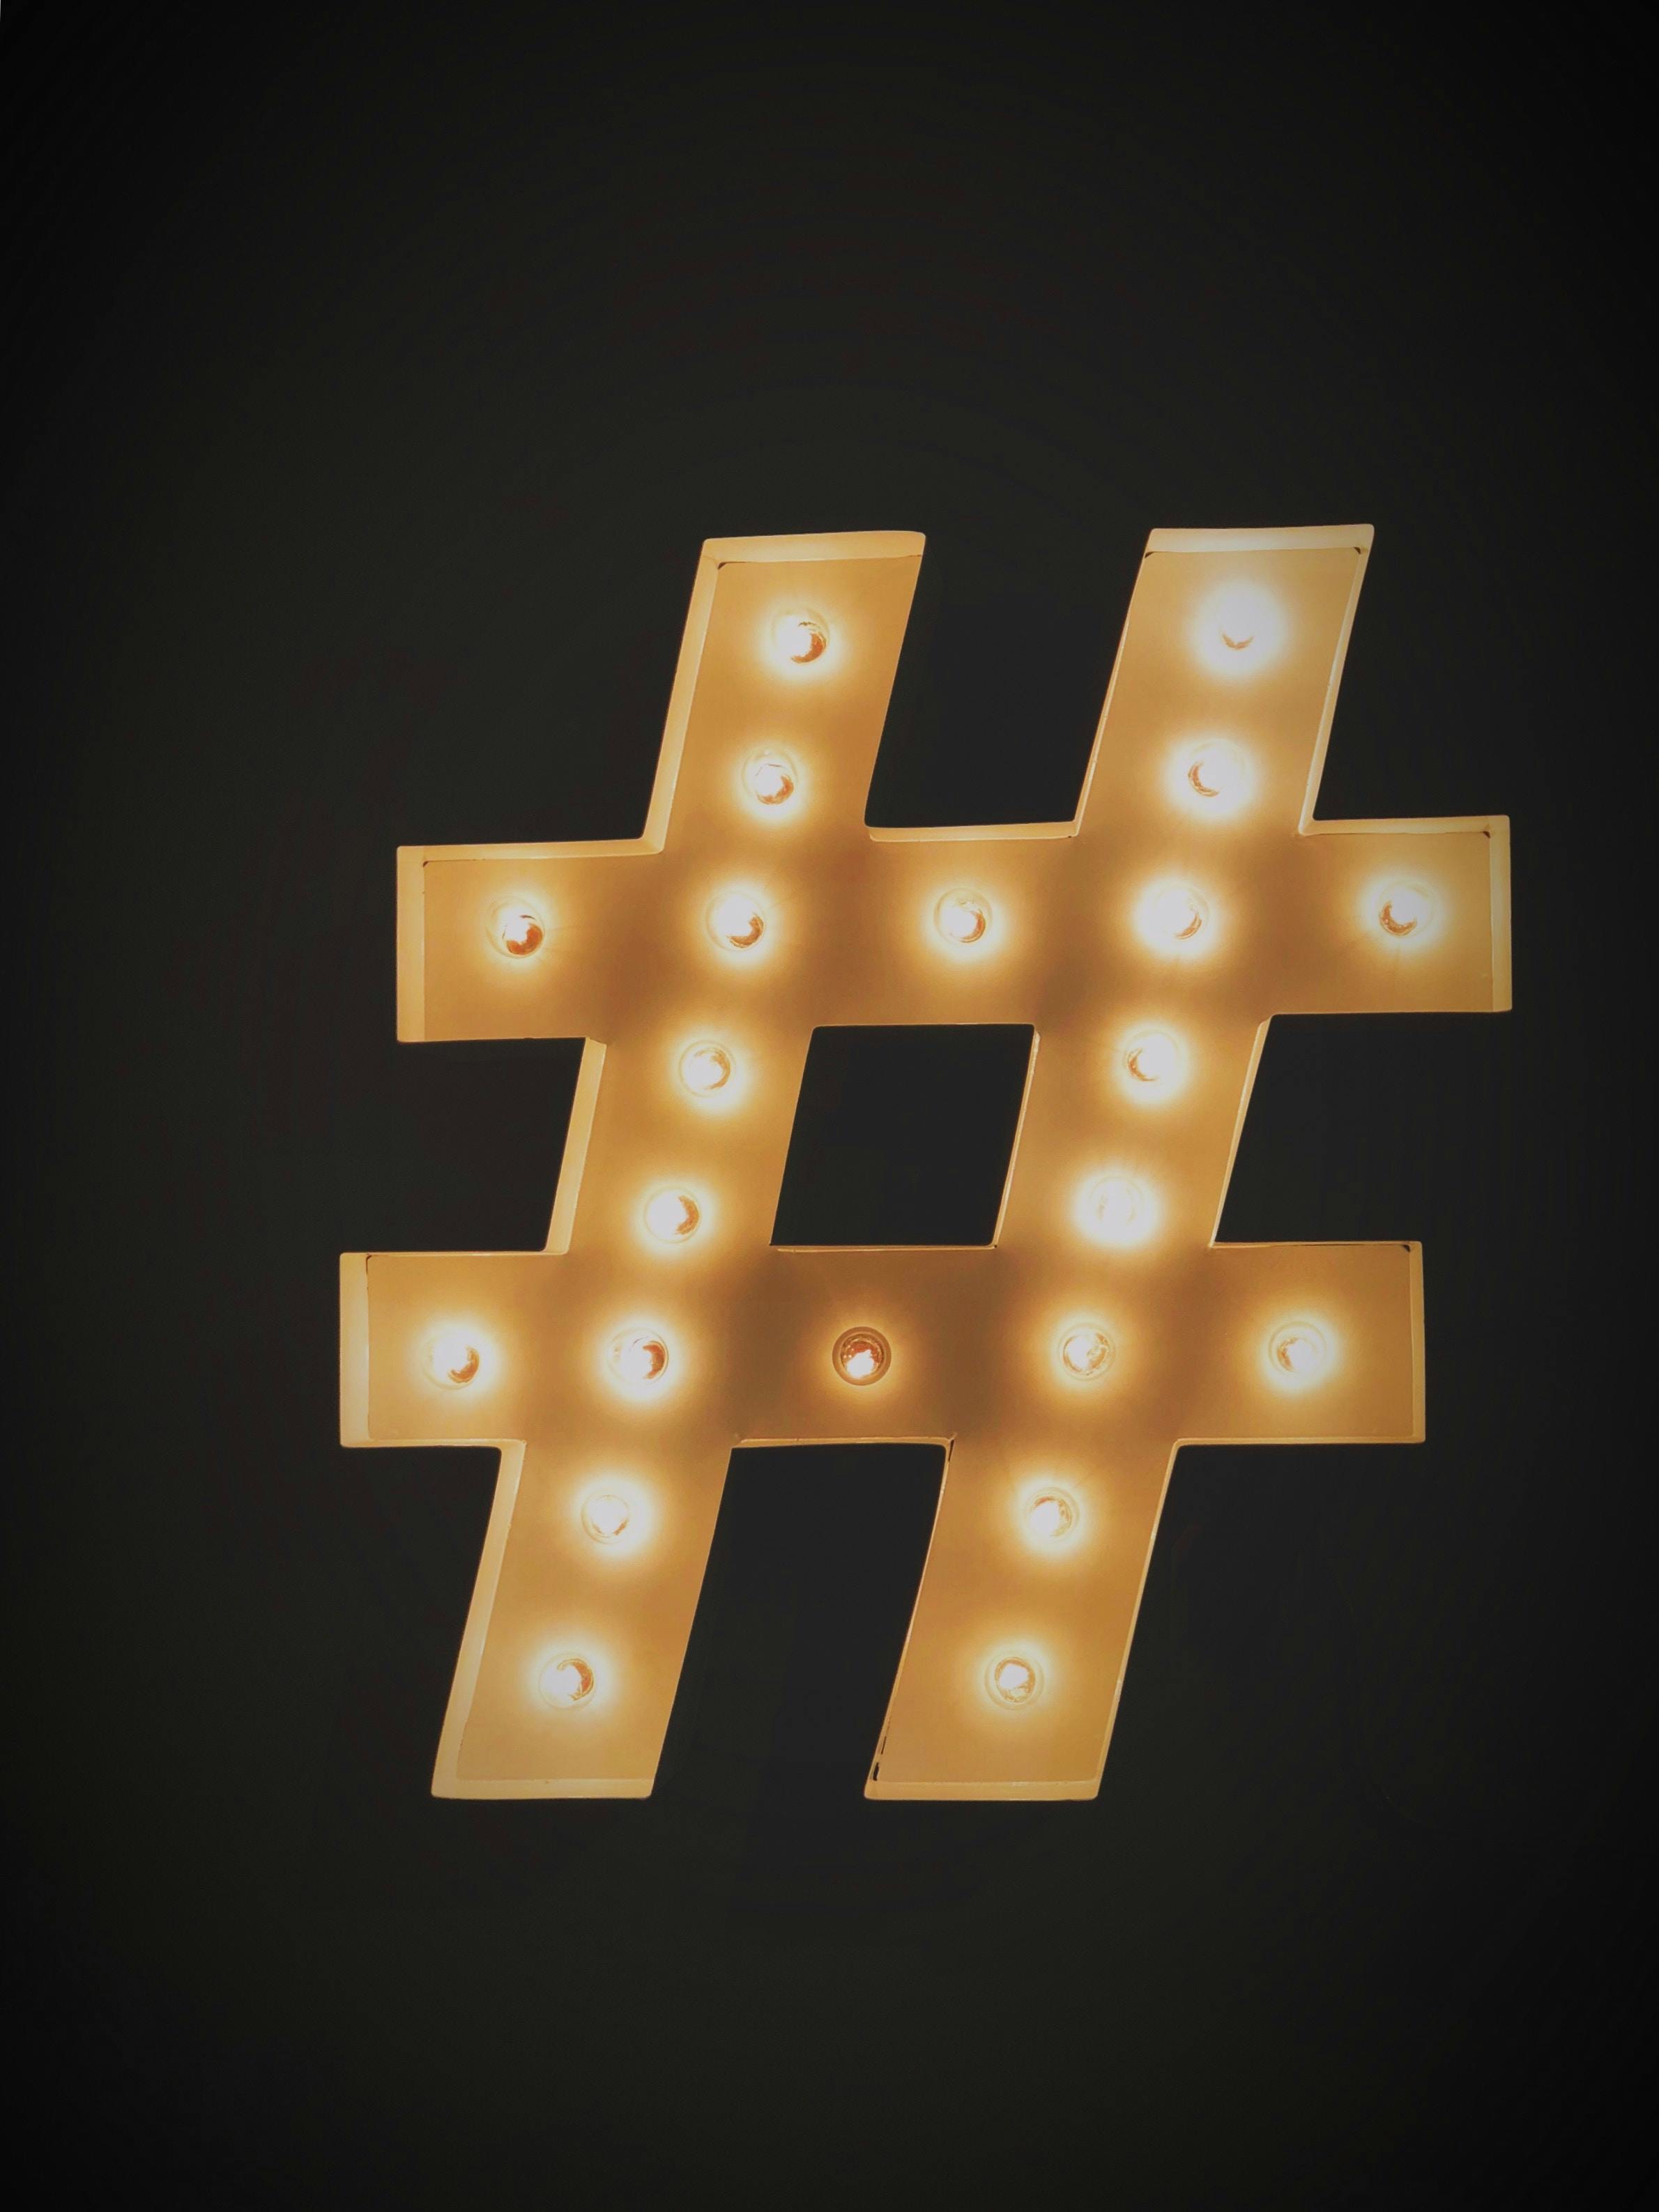 Cover Image for Solving hashtags problems